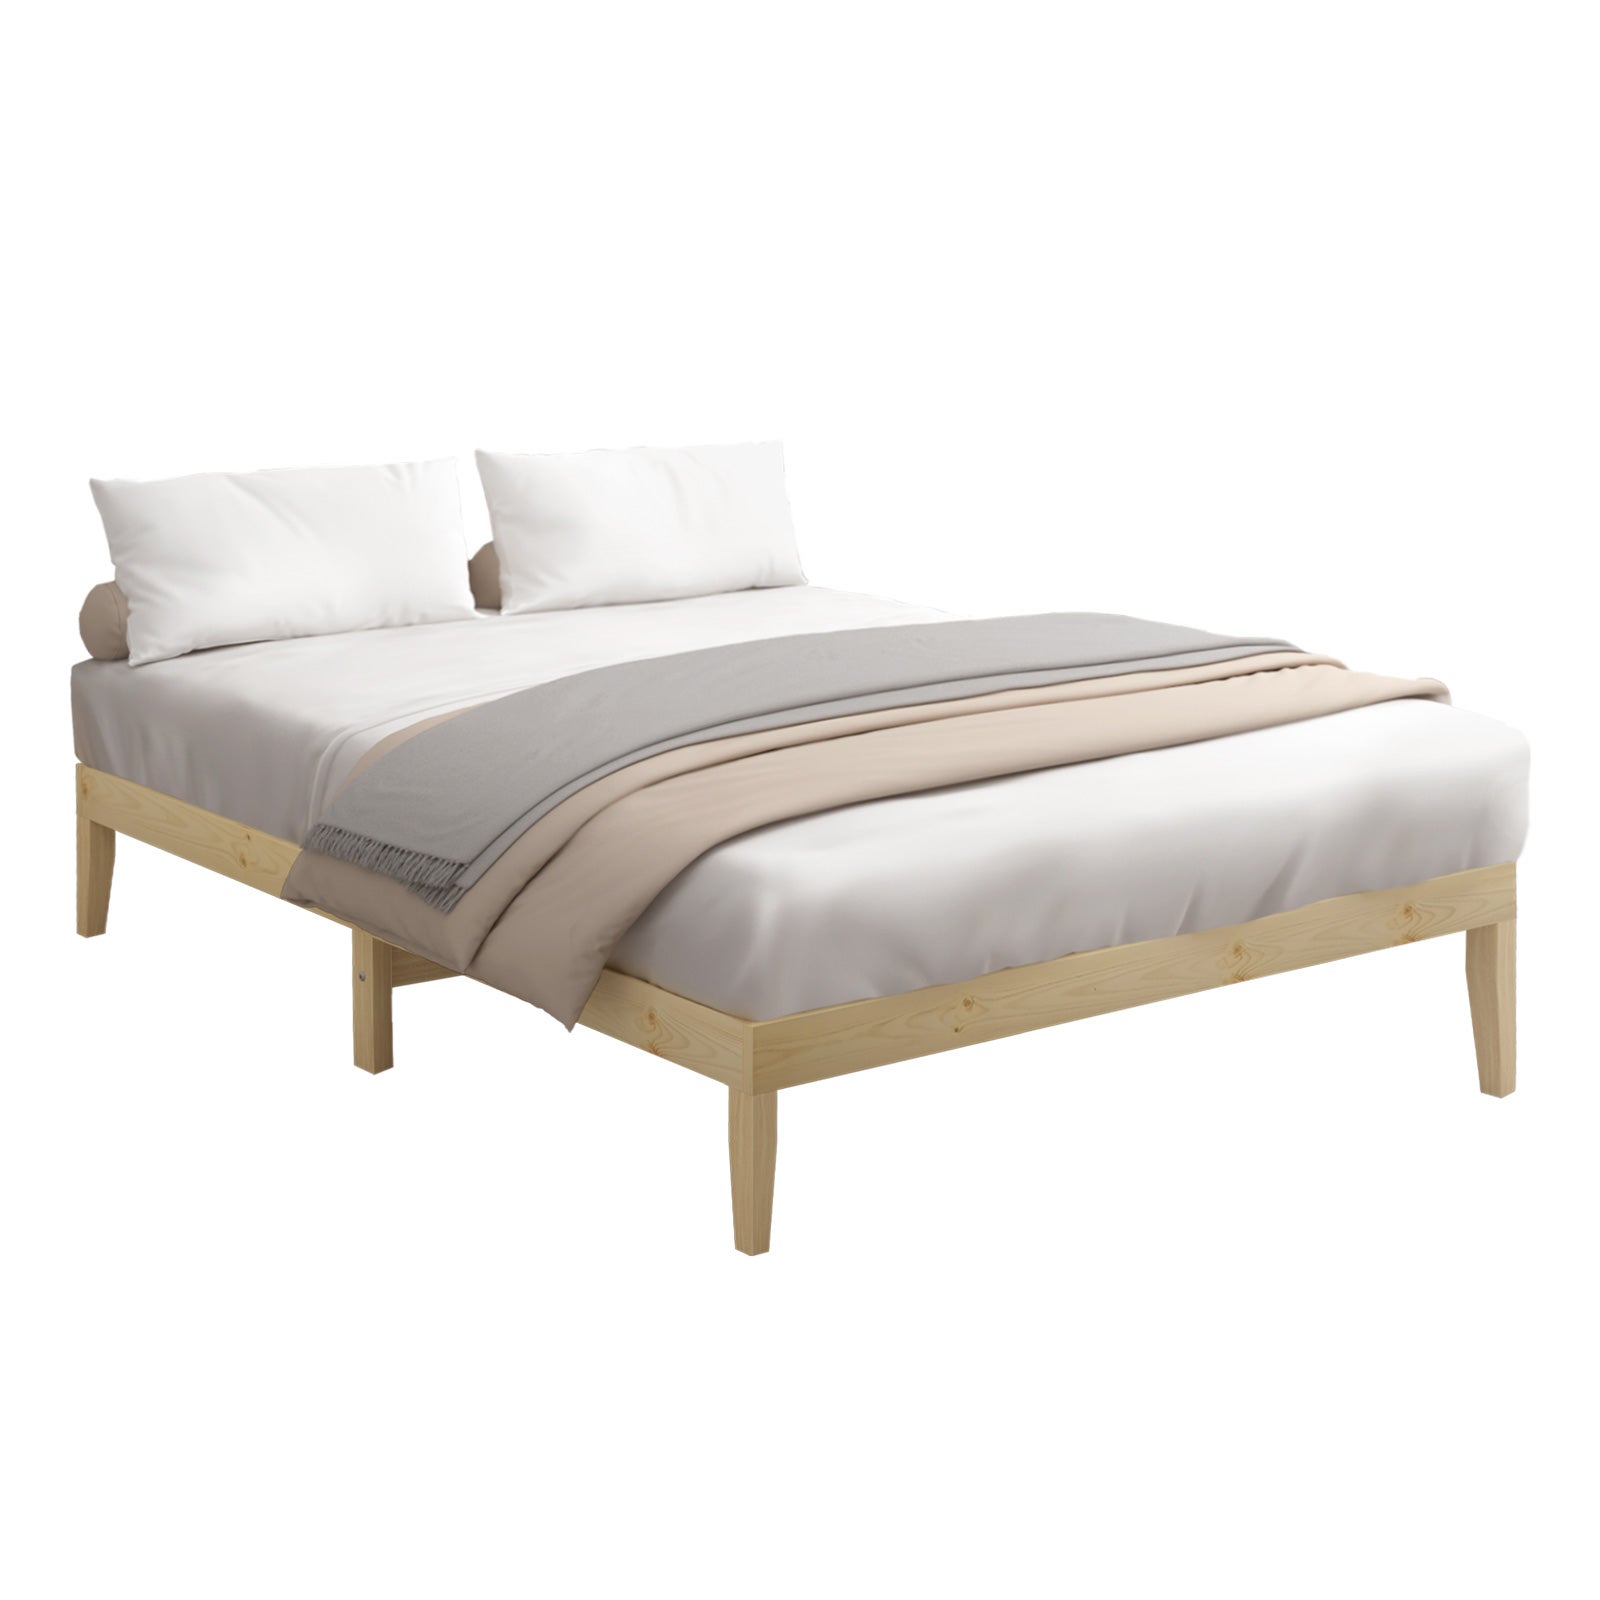 Oikiture Bed Frame Double Single King Single Size Wooden Timber Mattress Base